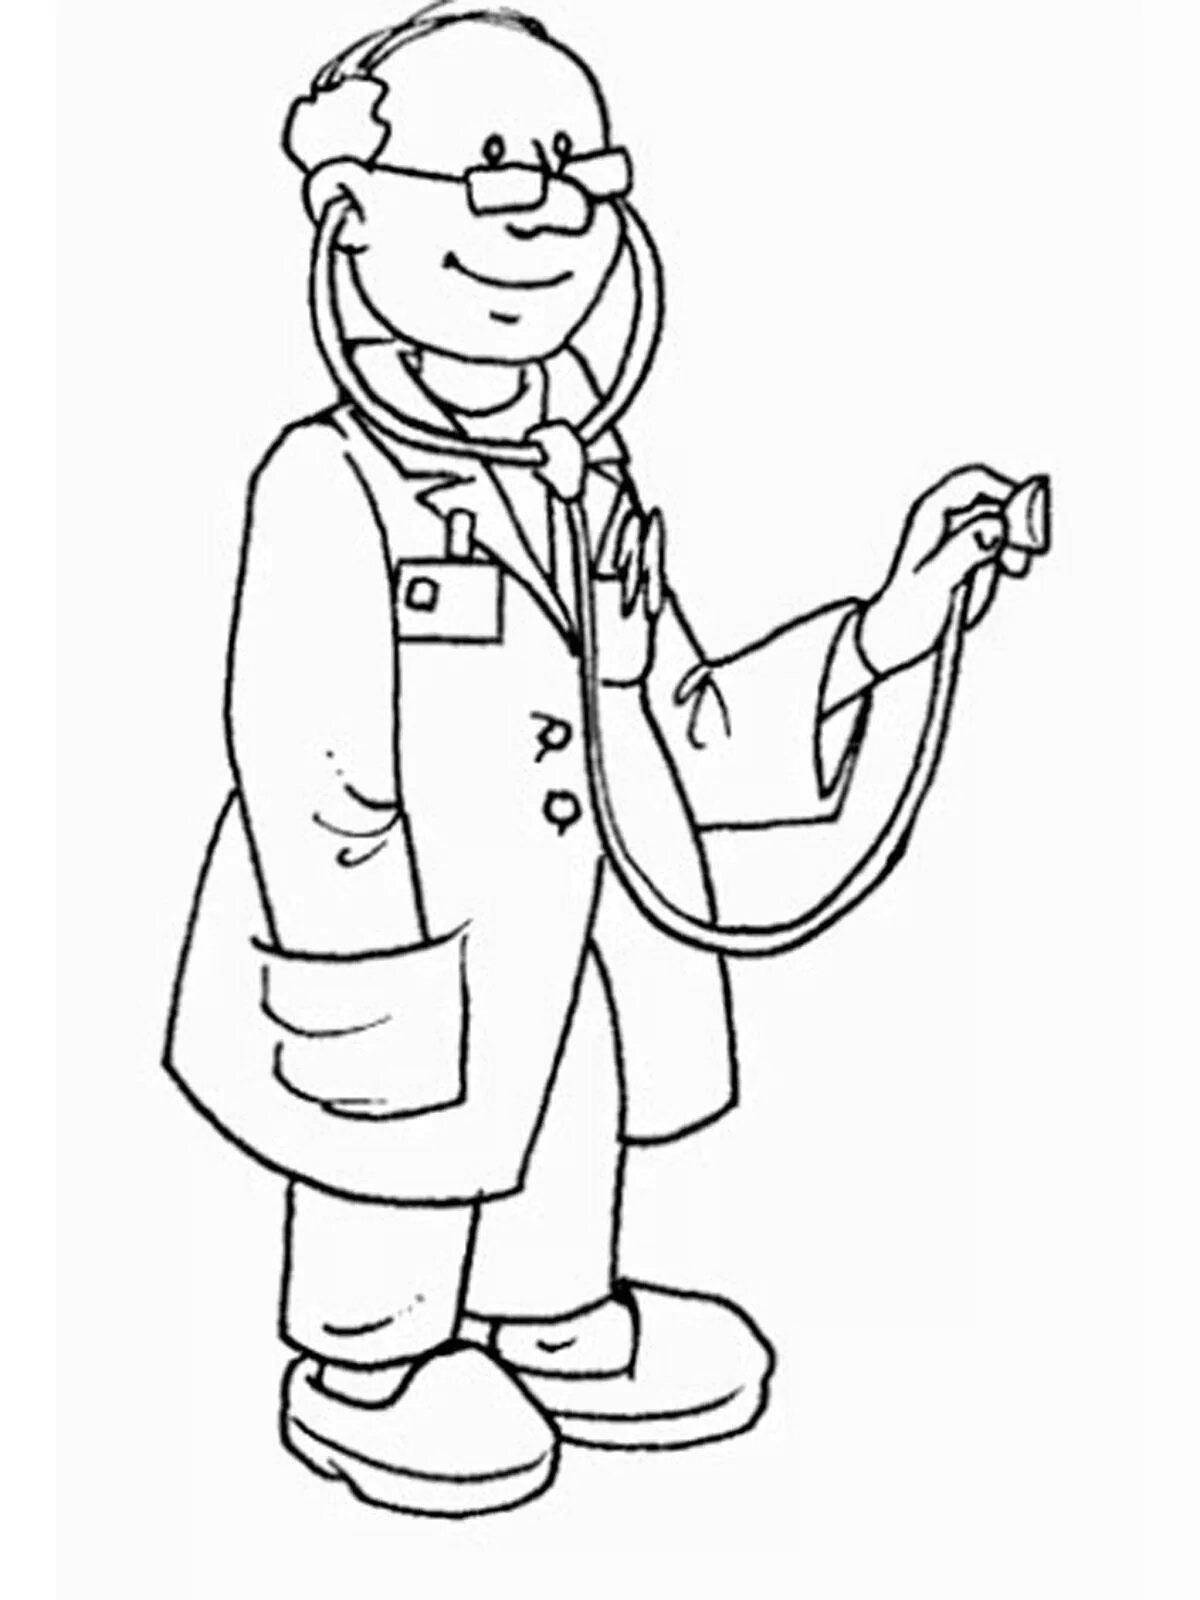 Coloring book cheerful doctor doctor